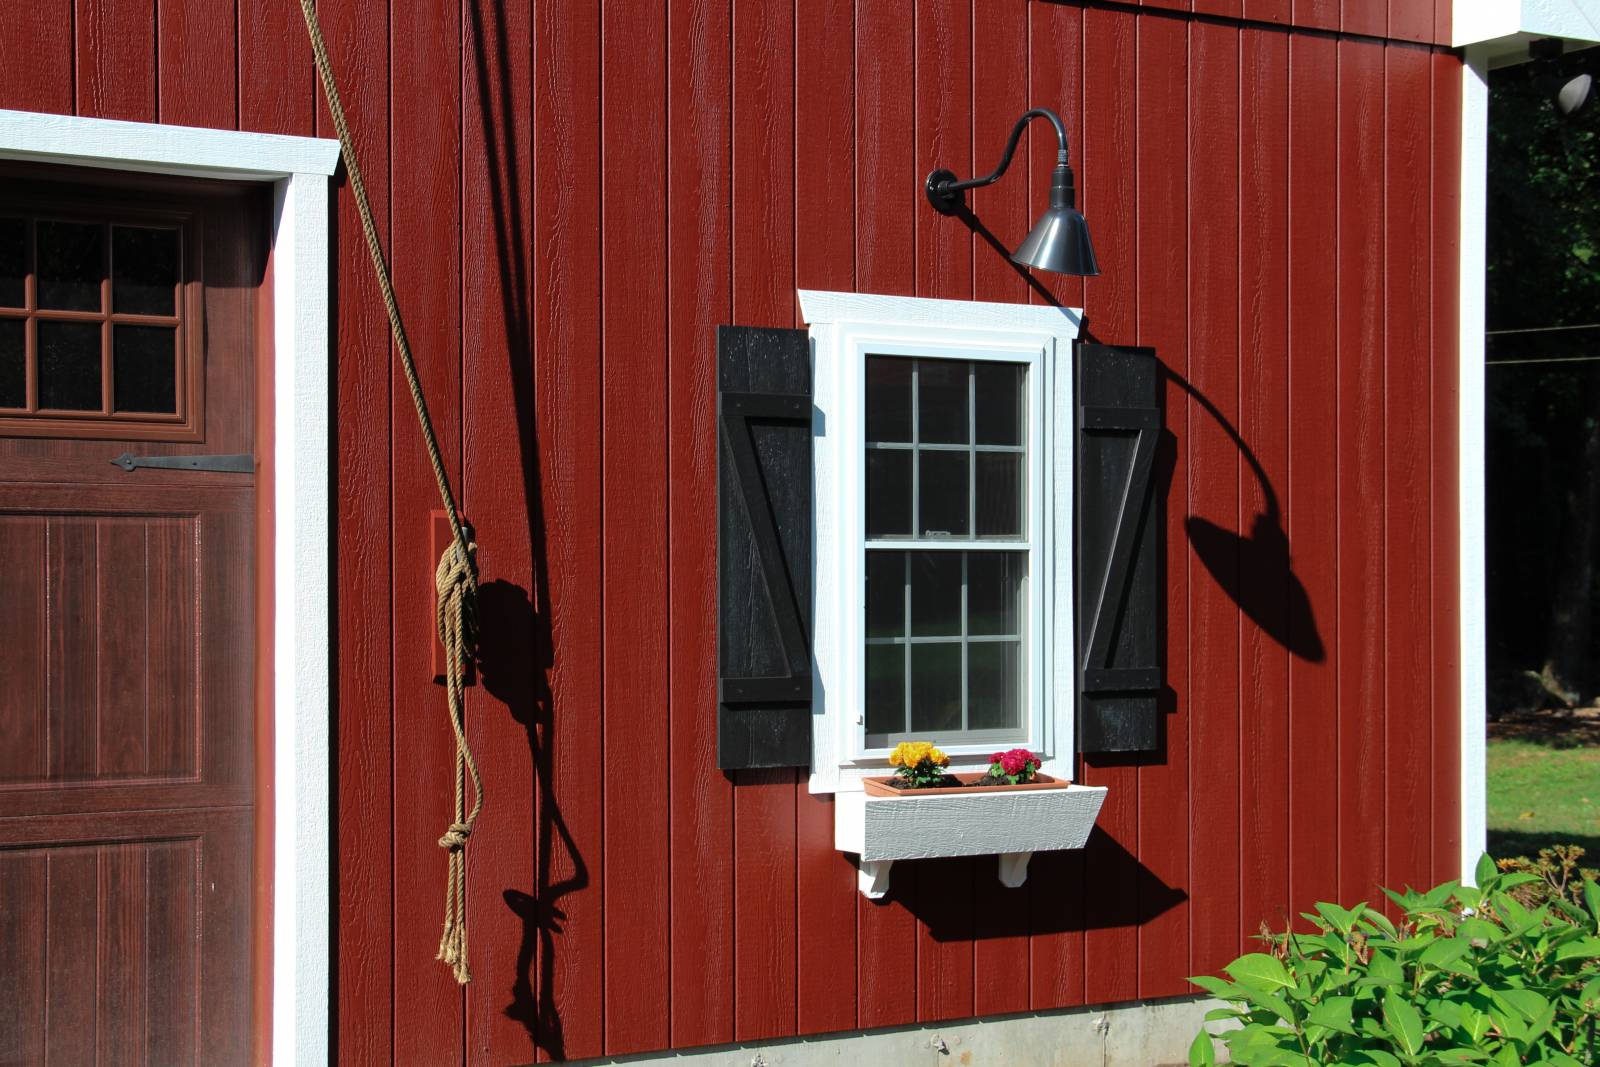 Insulated Double Hung Window with Black Z-Style Shutters • White Trim • Flowerbox • Rope from Trolley Beam Pulley